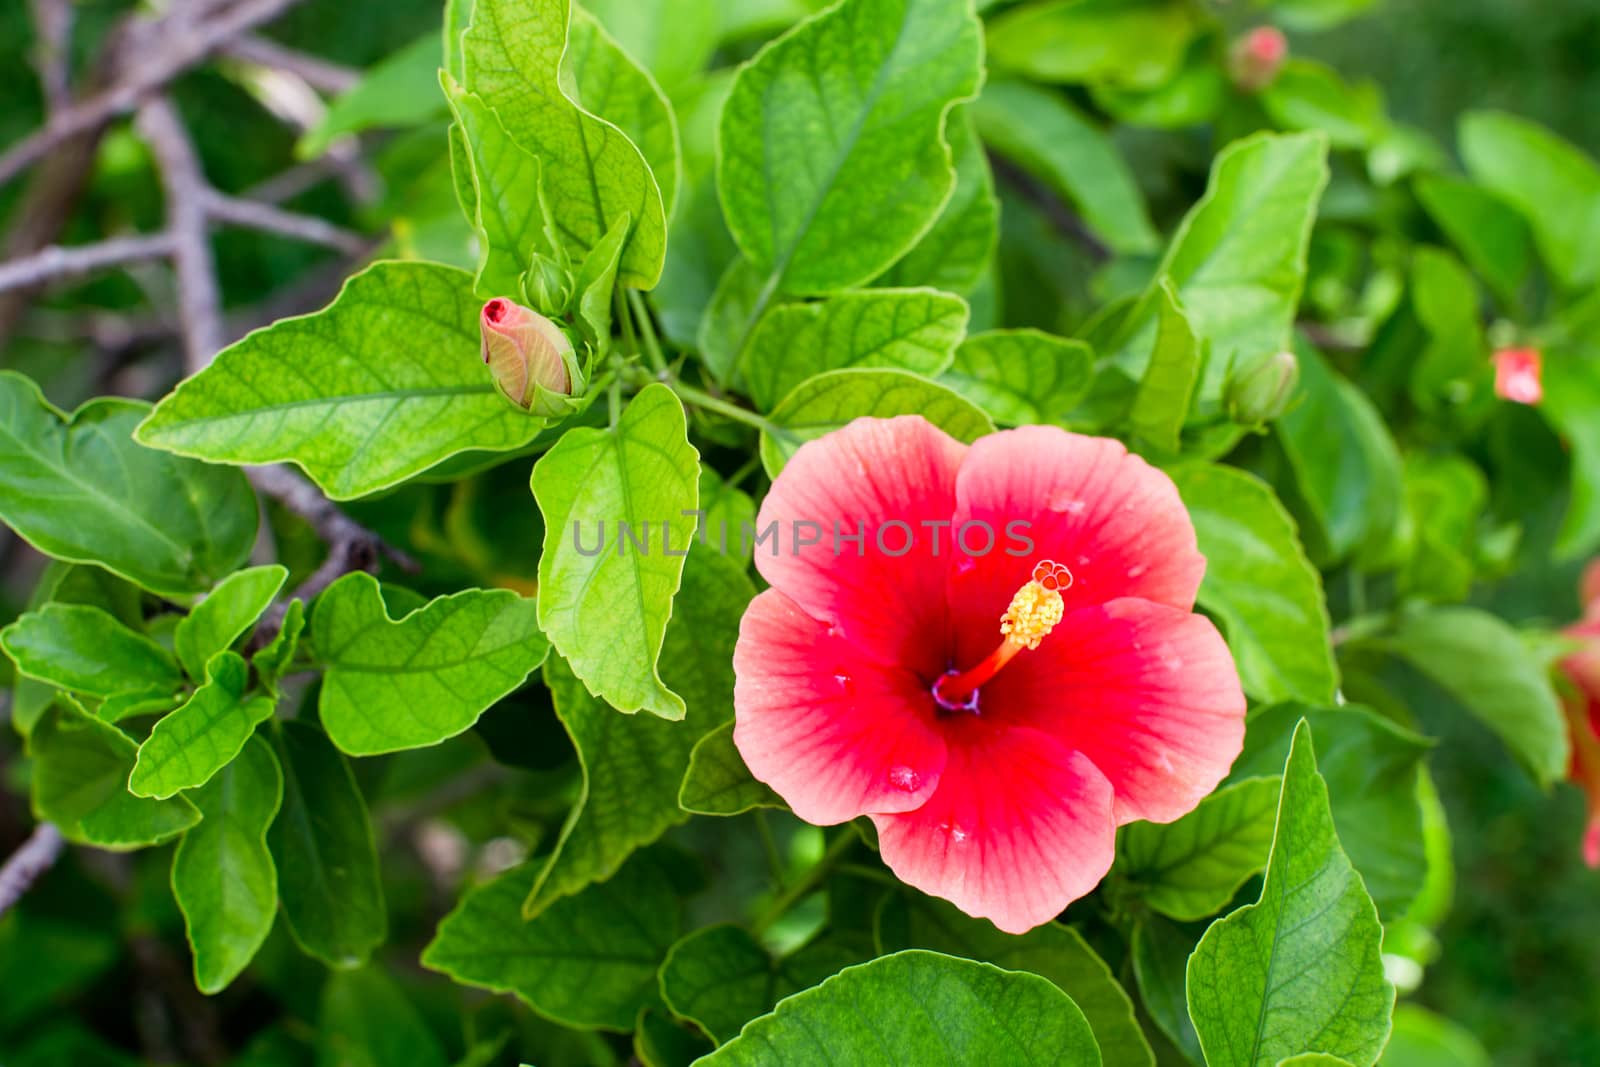 Hibiscus and its natural green background in its environment